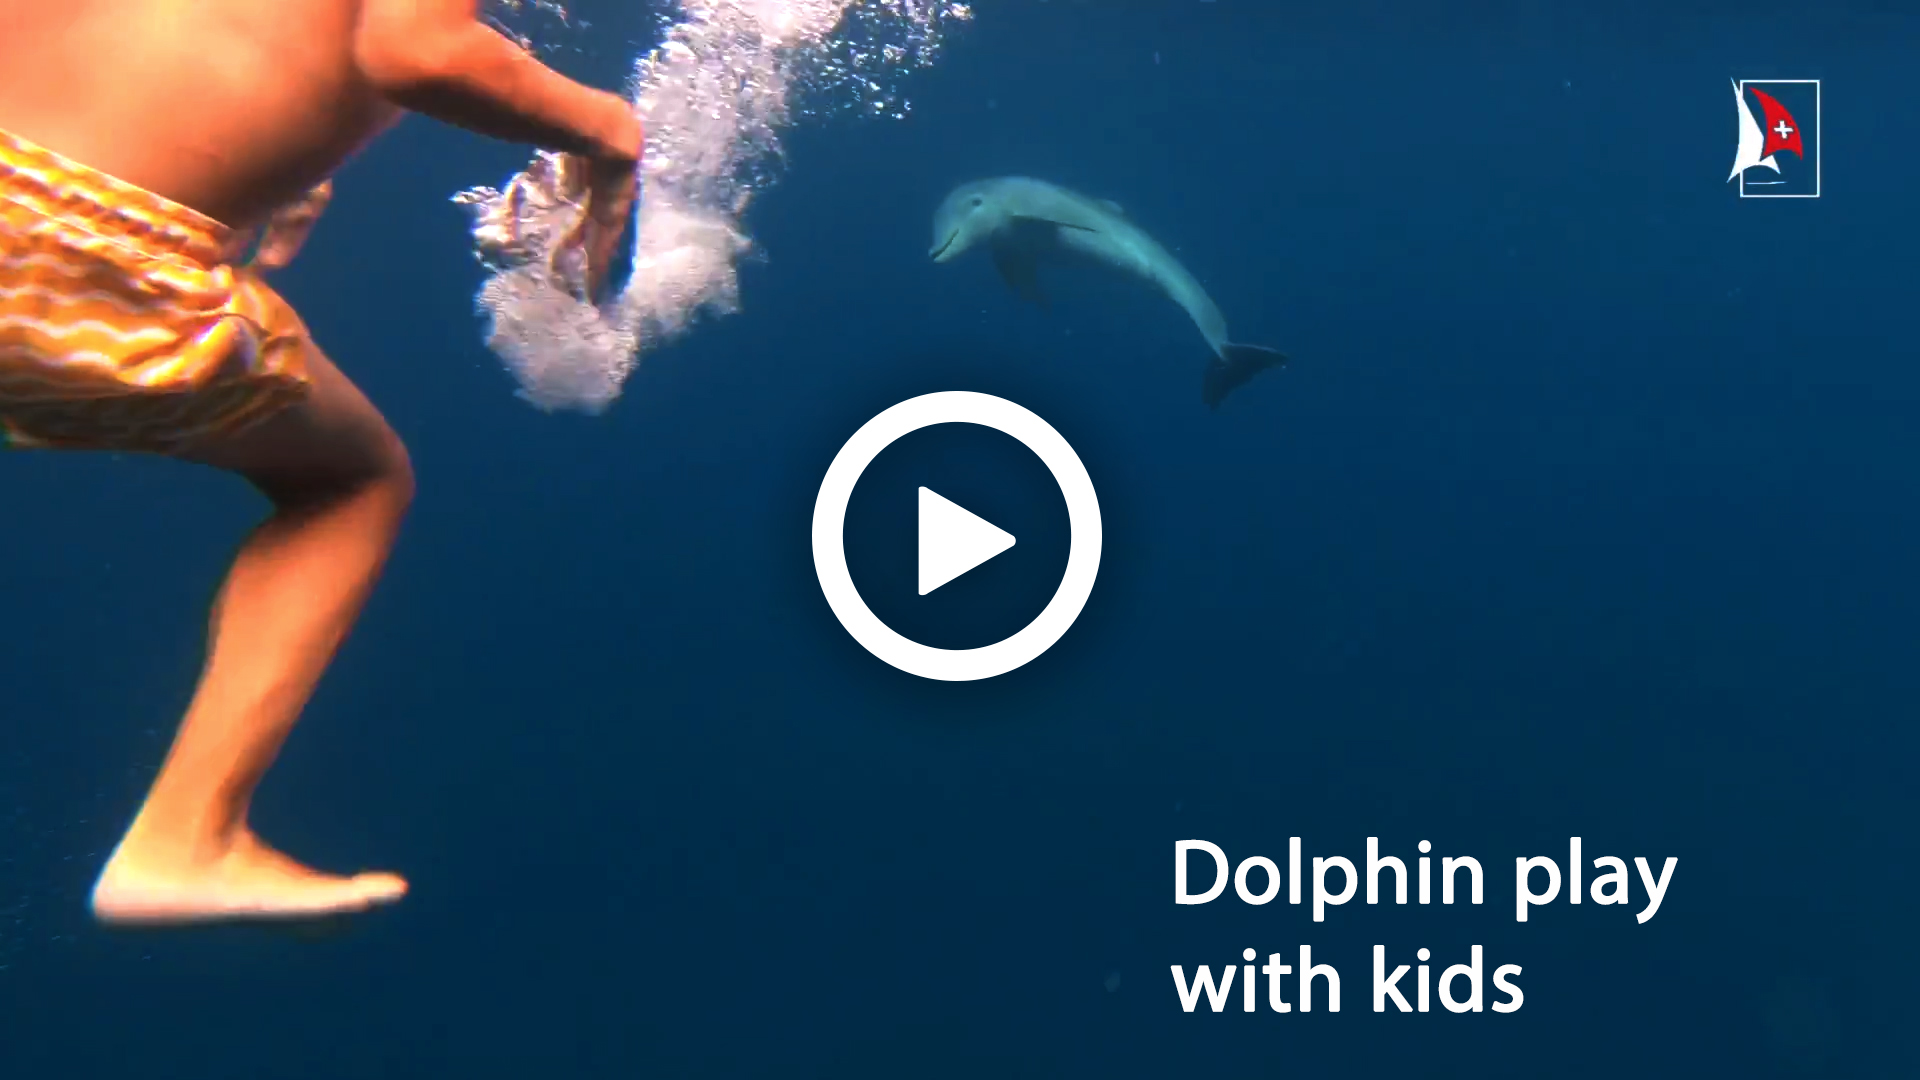 Sailing video to sale - dolphin play with kids